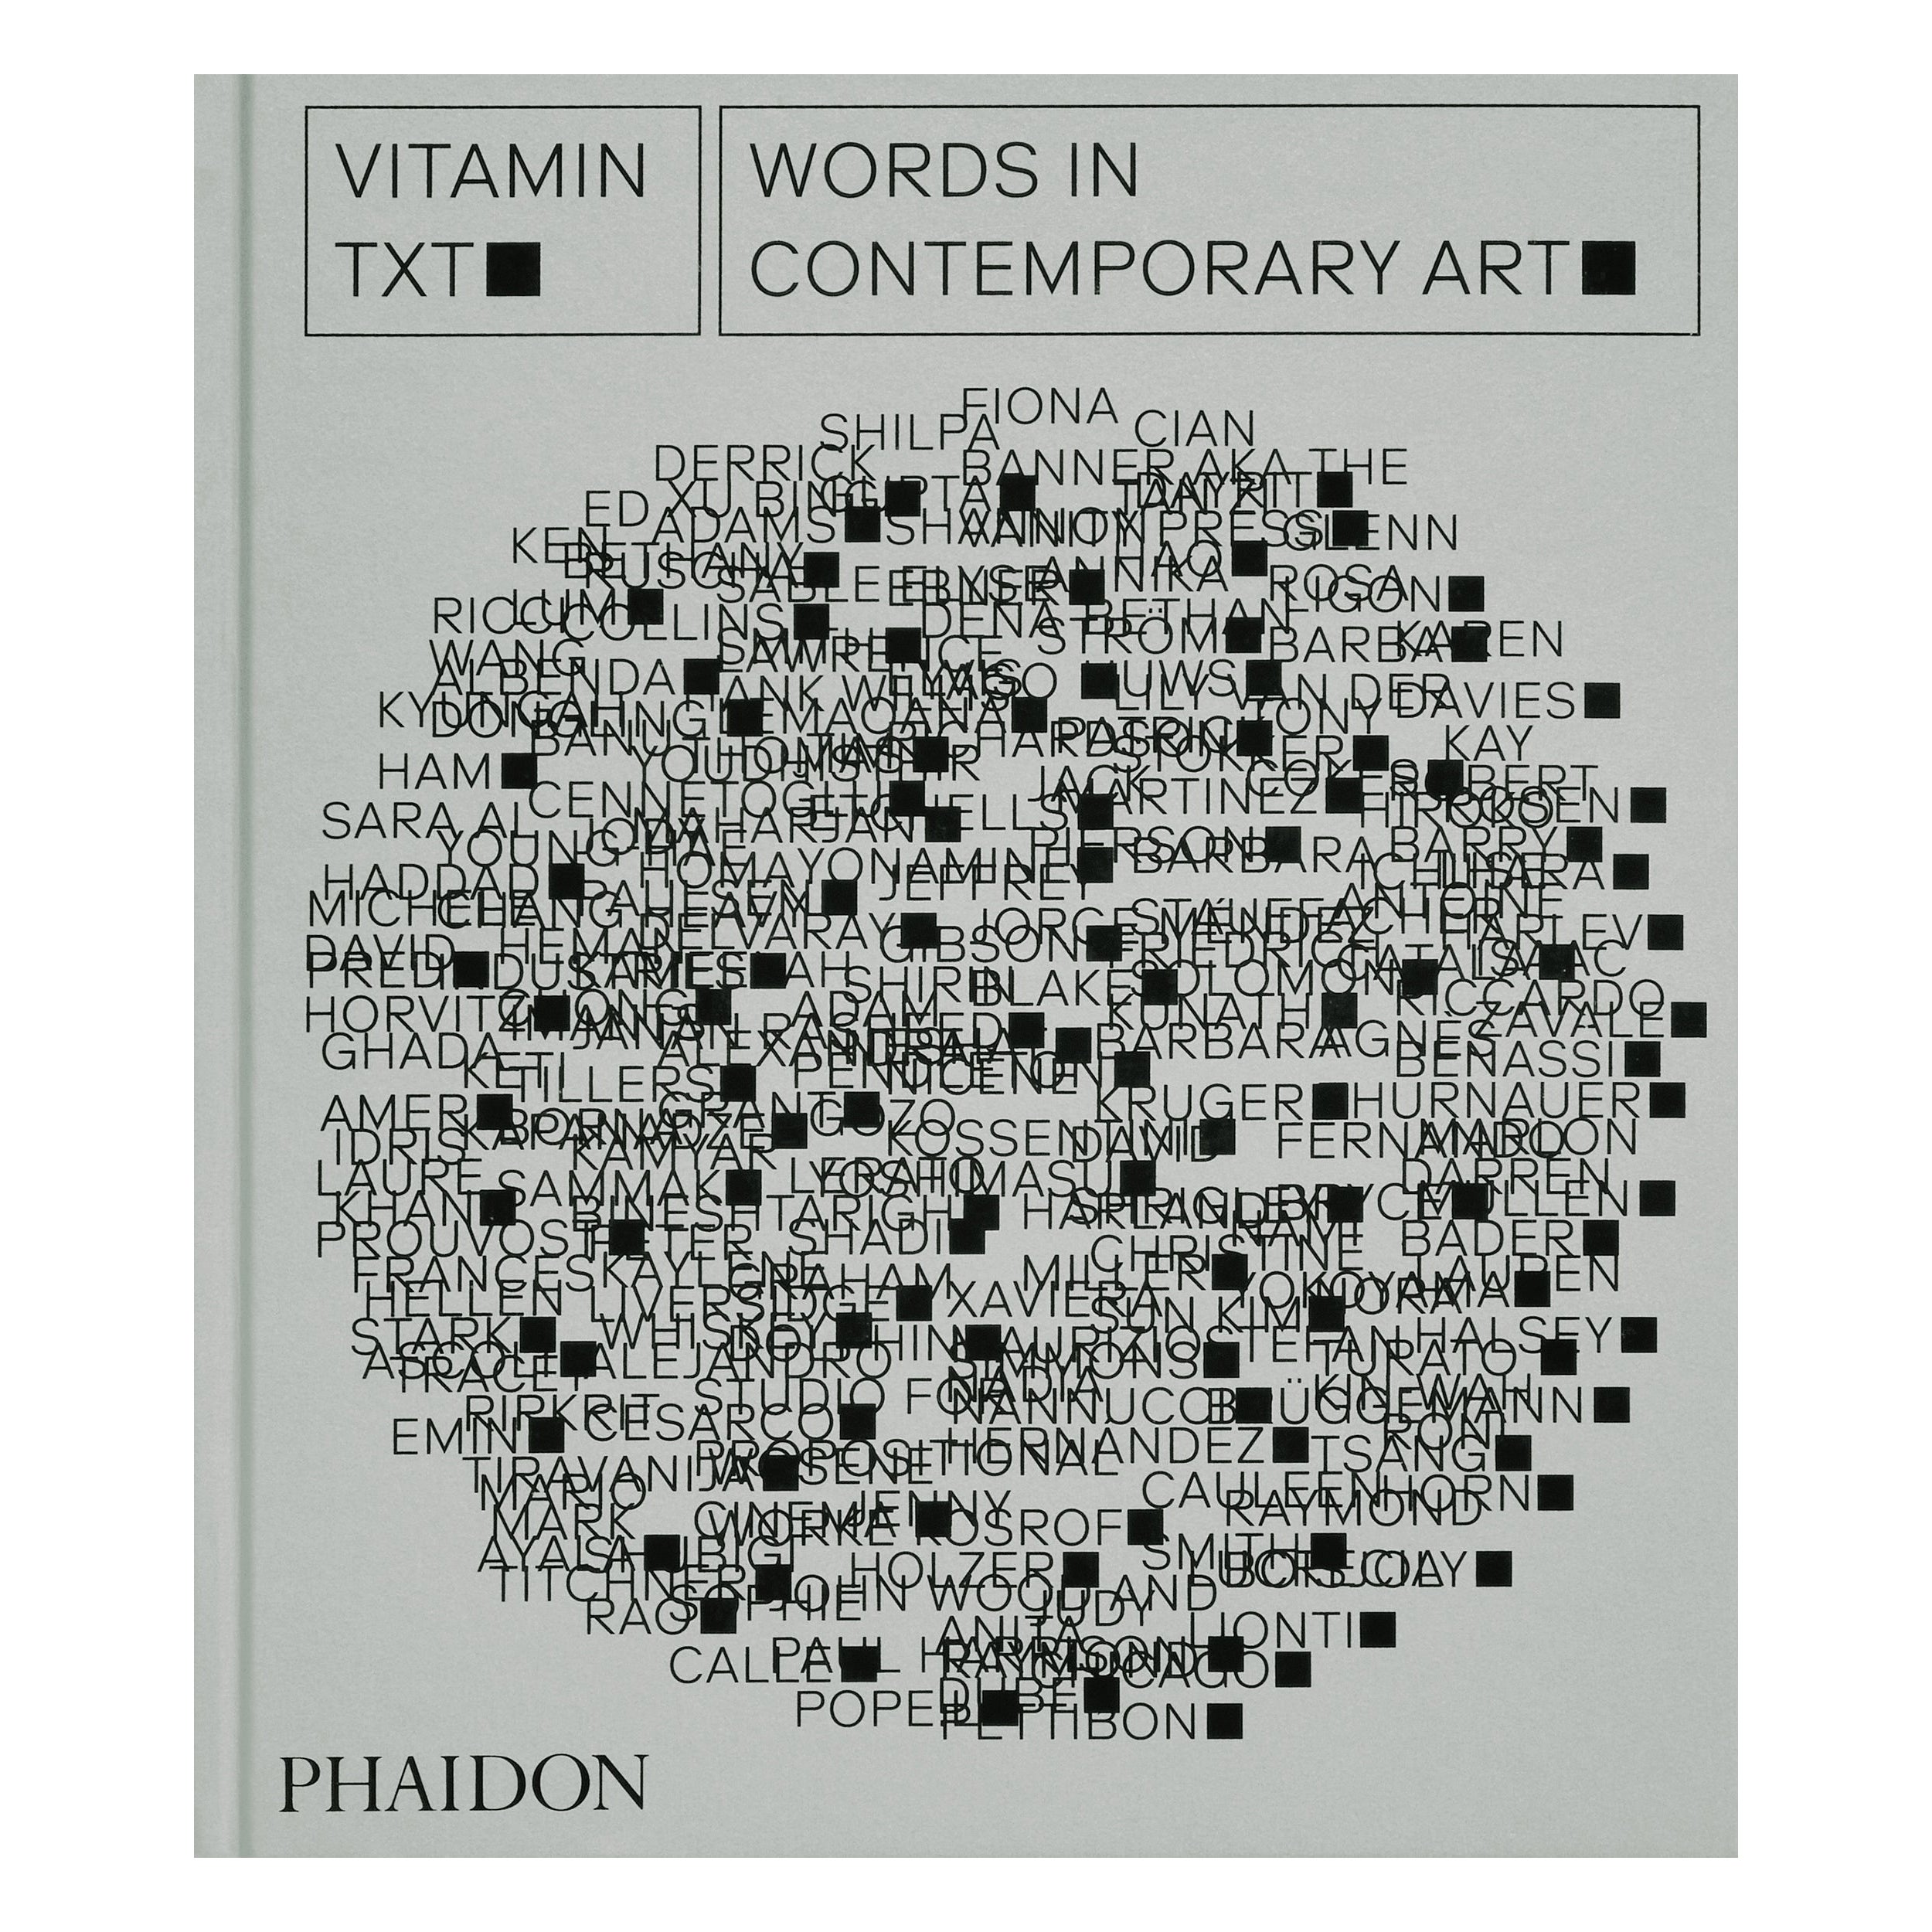 Vitamin Txt Words in Contemporary Art For Sale